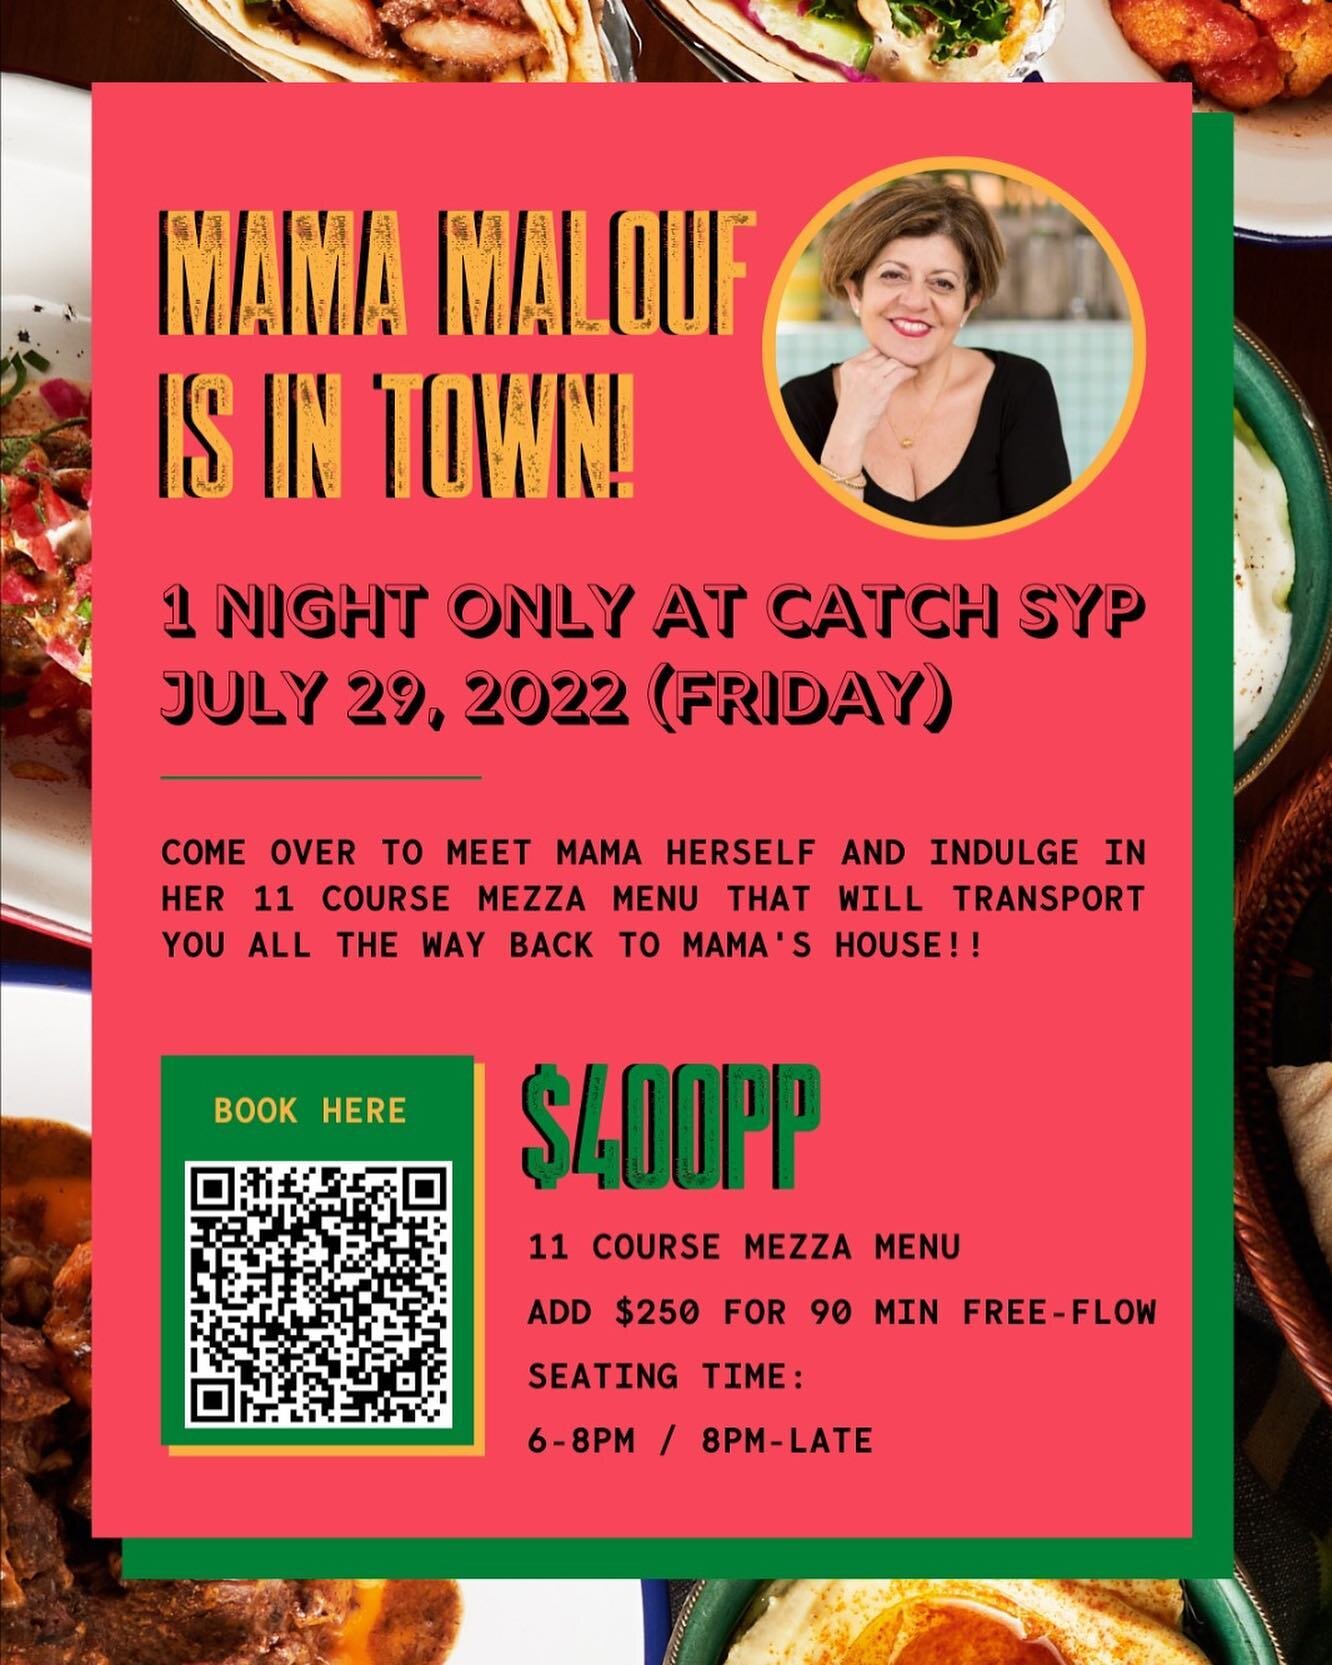 ✨Yes! Mama will be back in Catch&rsquo;s kitchen for a night with all of the laughs, hugs and delicious dishes! 

On Friday July 29, come over SYP to meet the lady herself and indulge in her 11 course mezza menu that takes you straight to her home 🏠